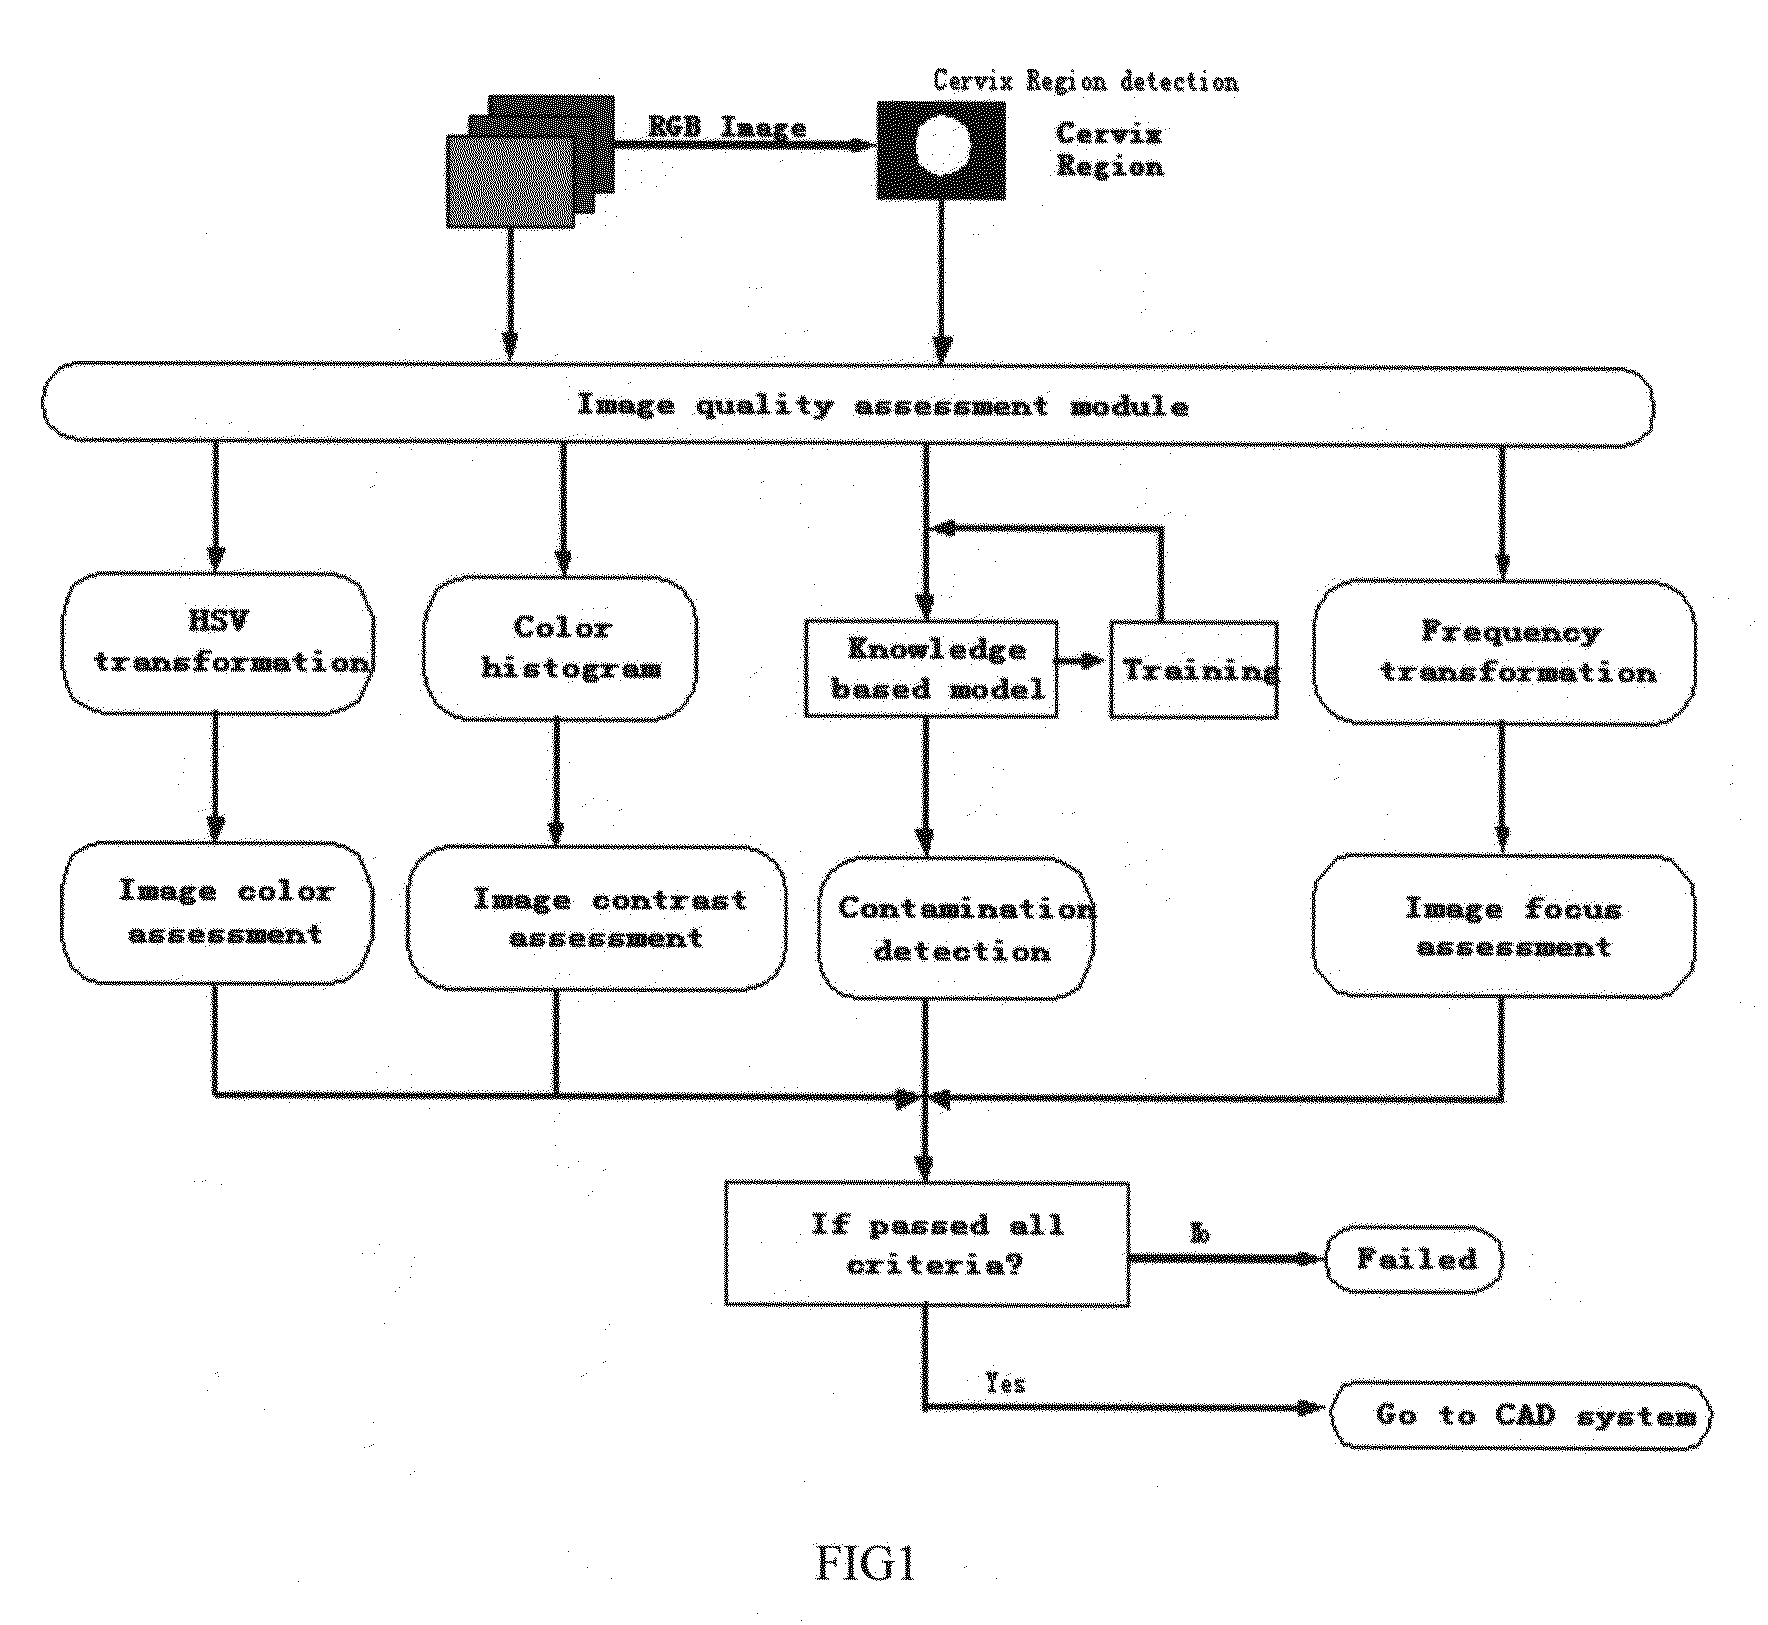 Method of image quality assessment to produce standardized imaging data